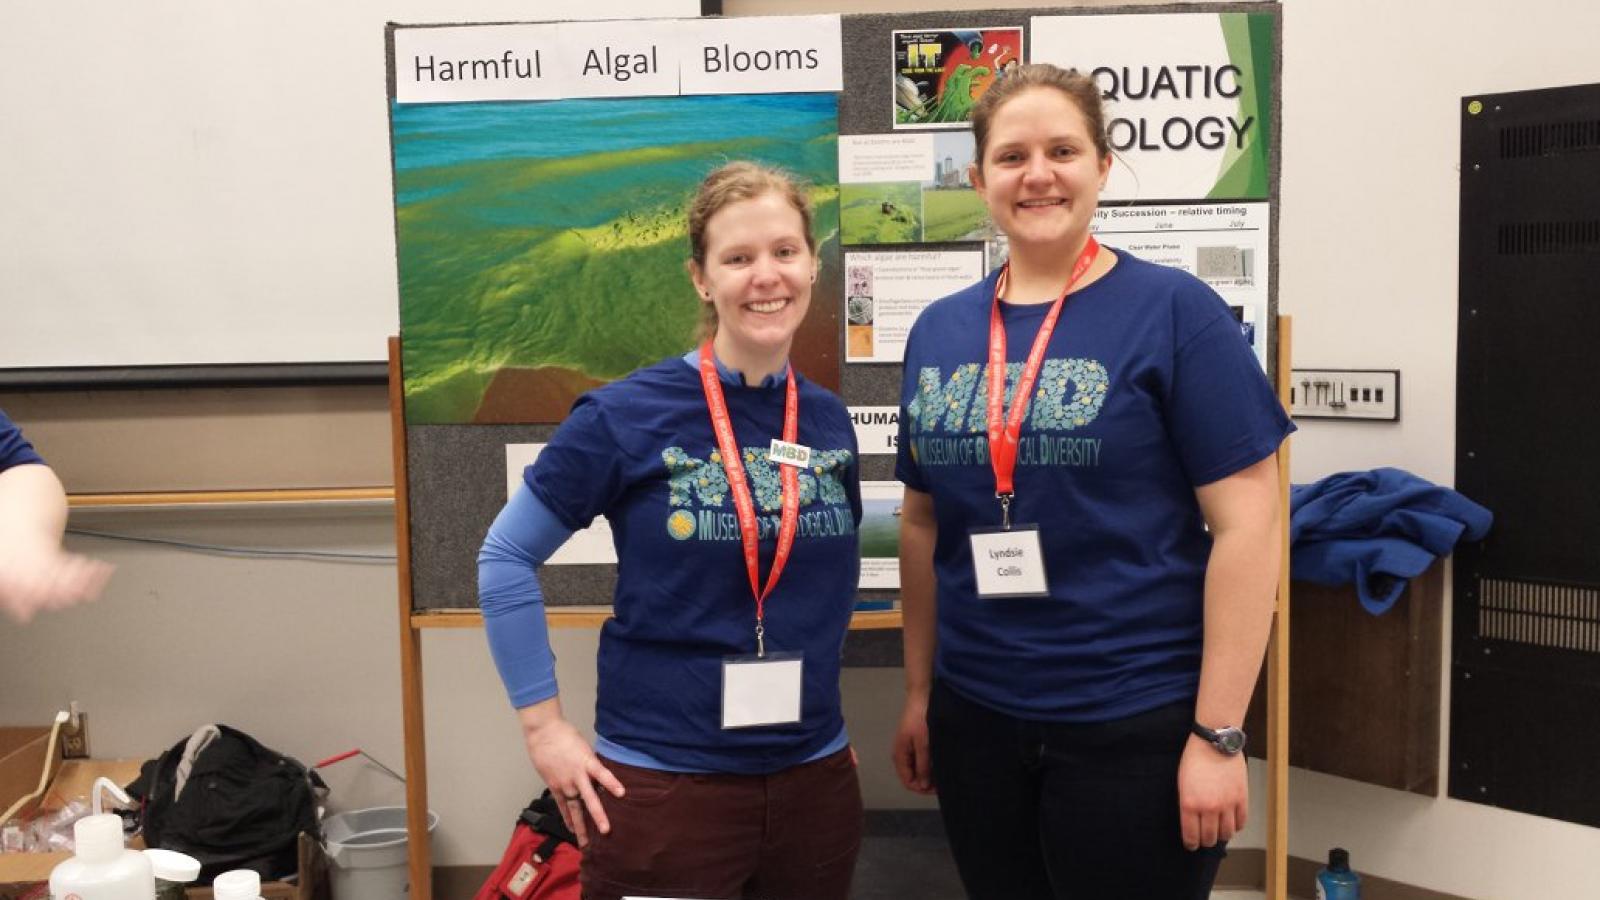 Zoe Almeida and Lyndsie Collis stand in front of the AEL display at the museum open house